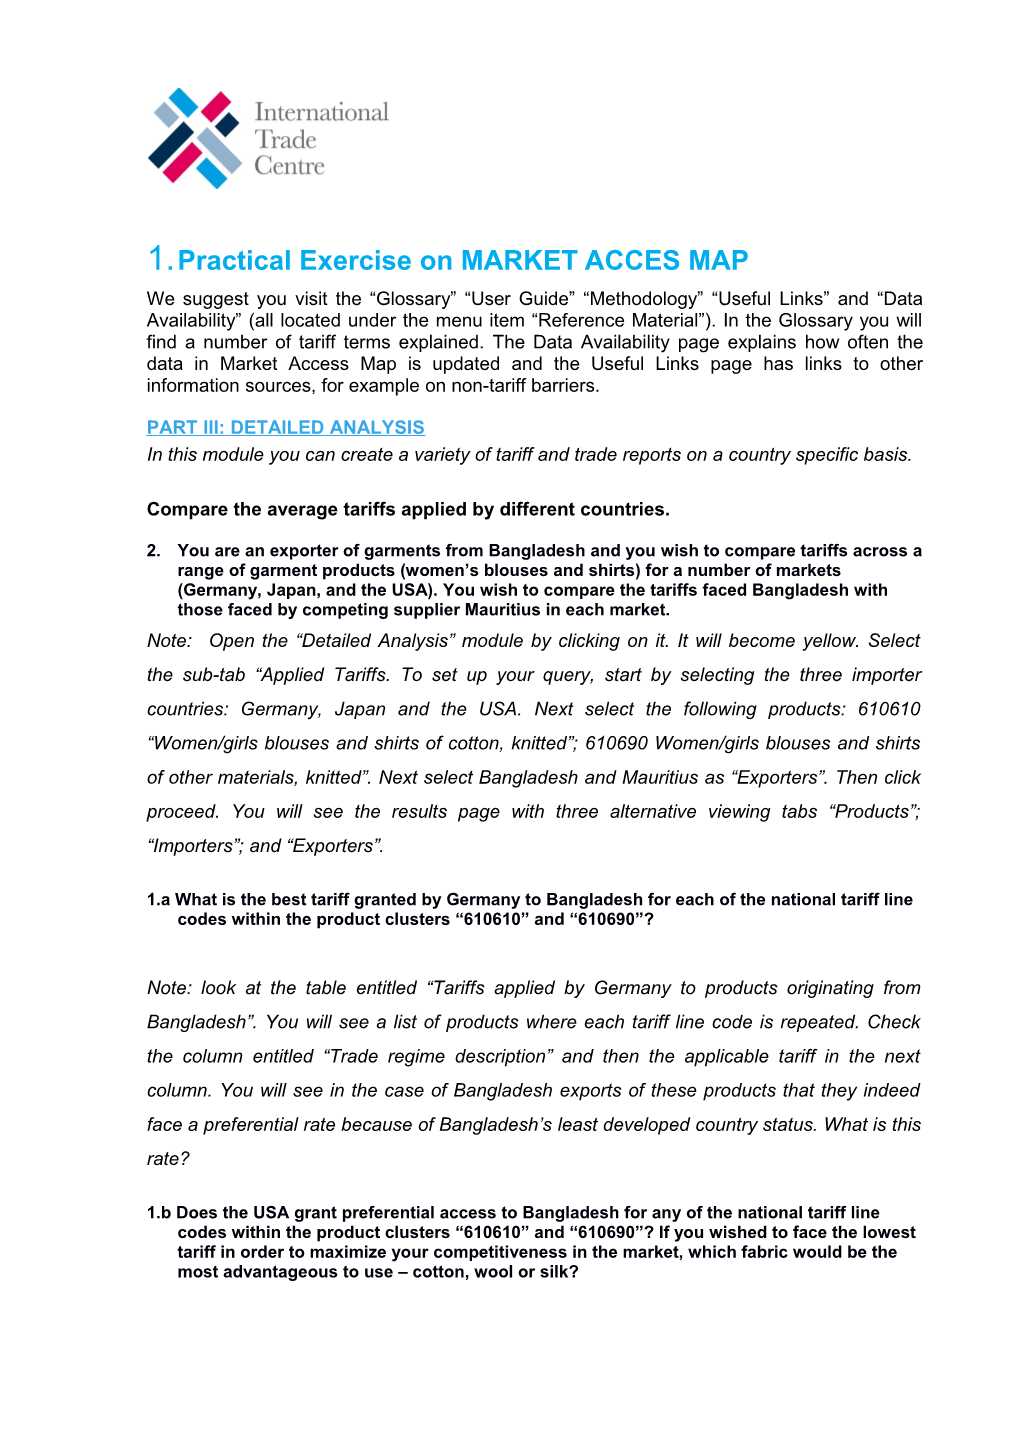 Practical Exercise on MARKET ACCES MAP